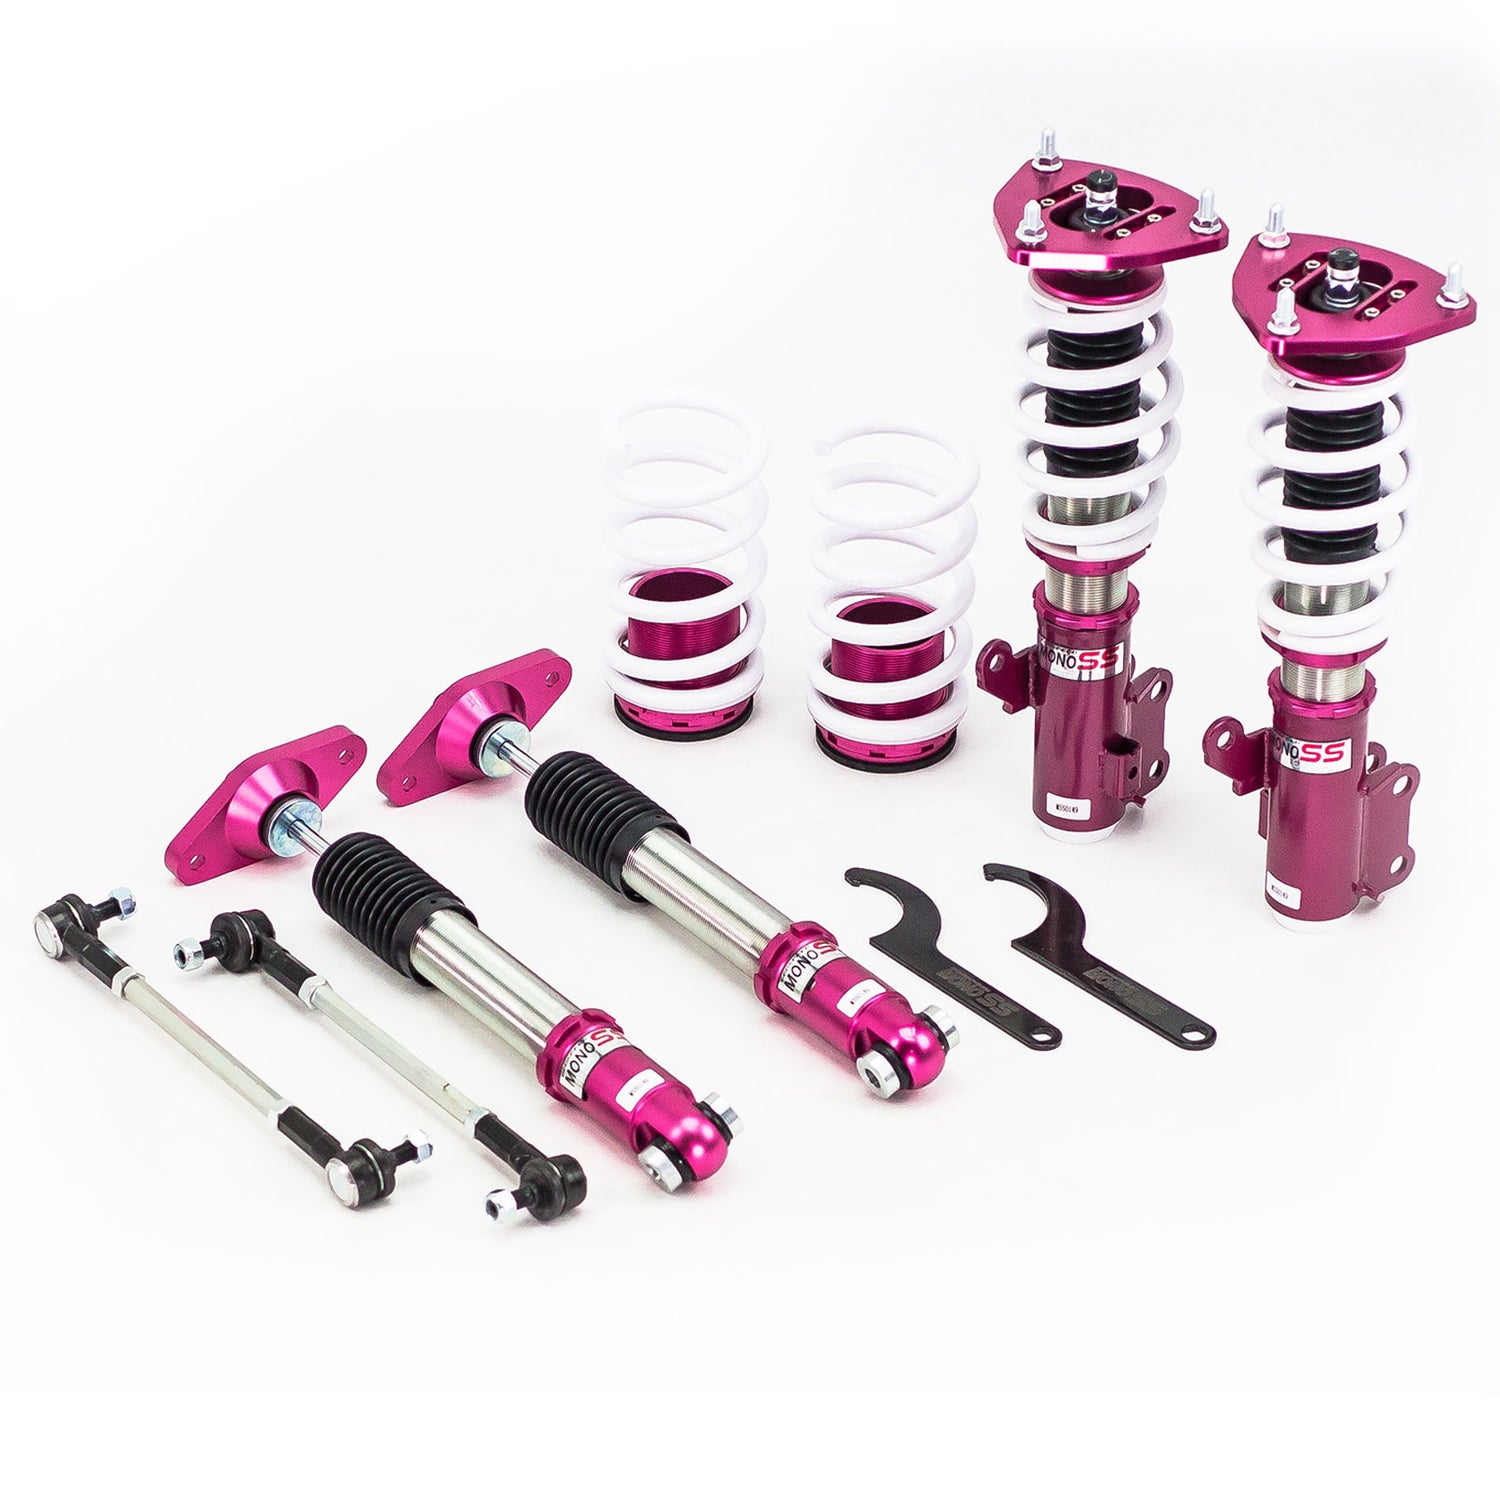 Godspeed MSS0149 MonoSS Coilover Lowering Kit, Fully Adjustable, Ride Height, Spring Tension And 16 Click Damping, Hyundai Genesis Coupe 2011-15